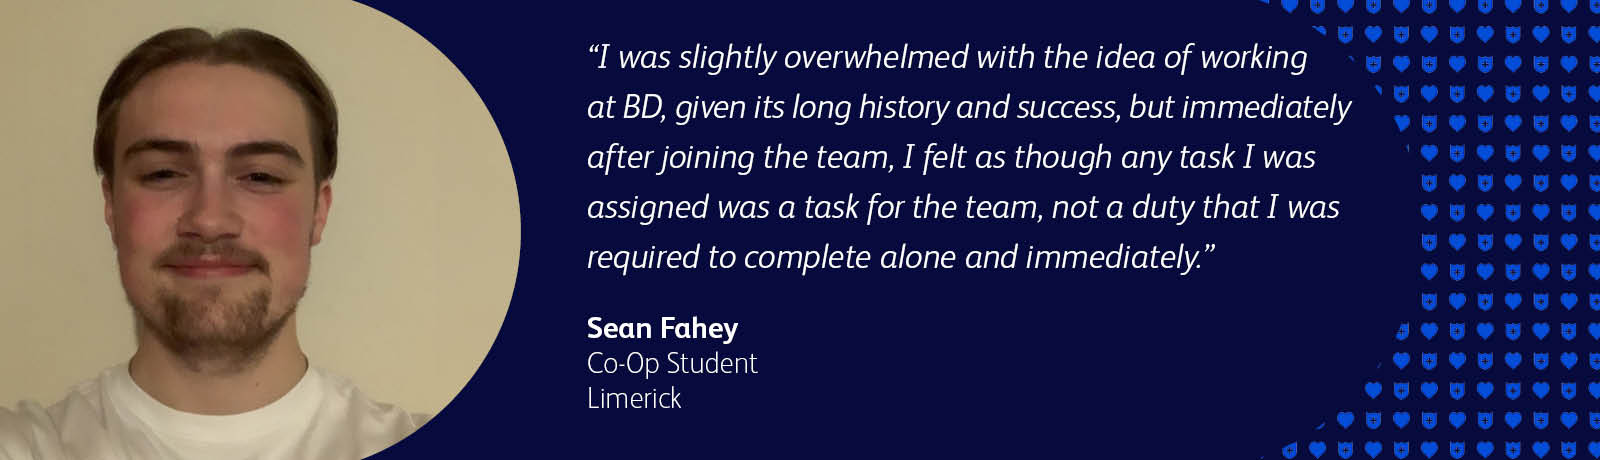 Sean Fahey, Co-op Student at BD Limerick